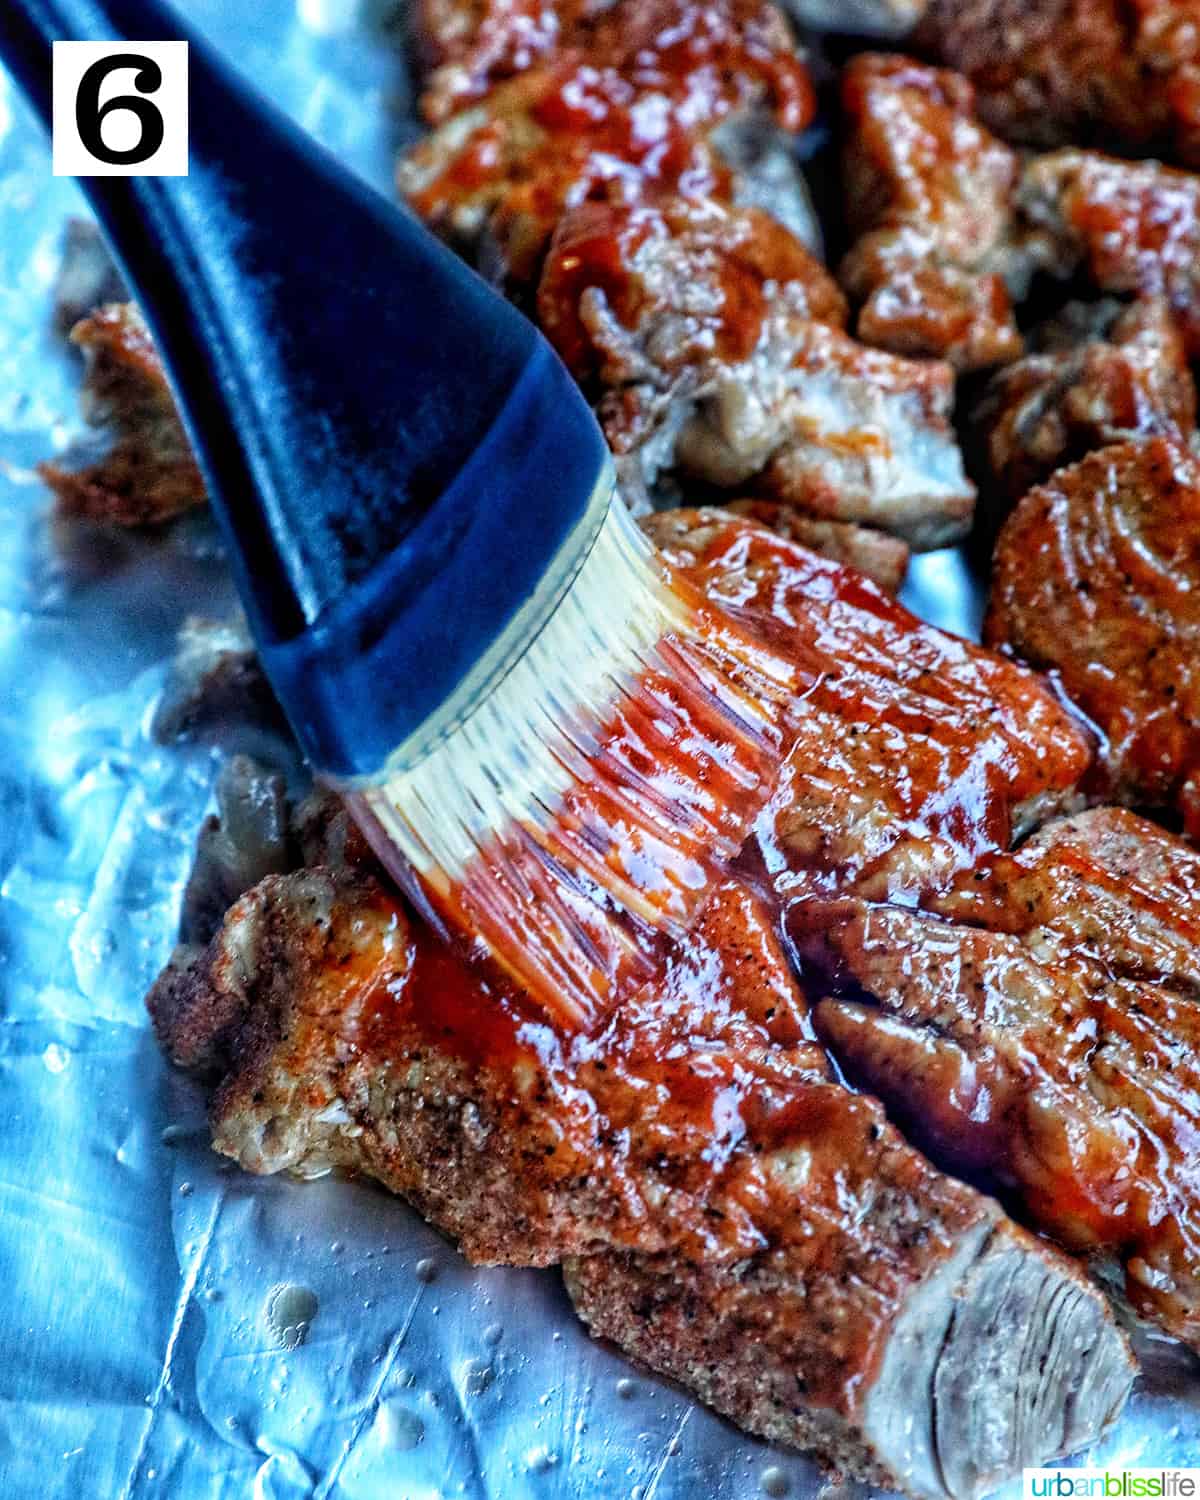 pastry brush basting ribs with bbq sauce.